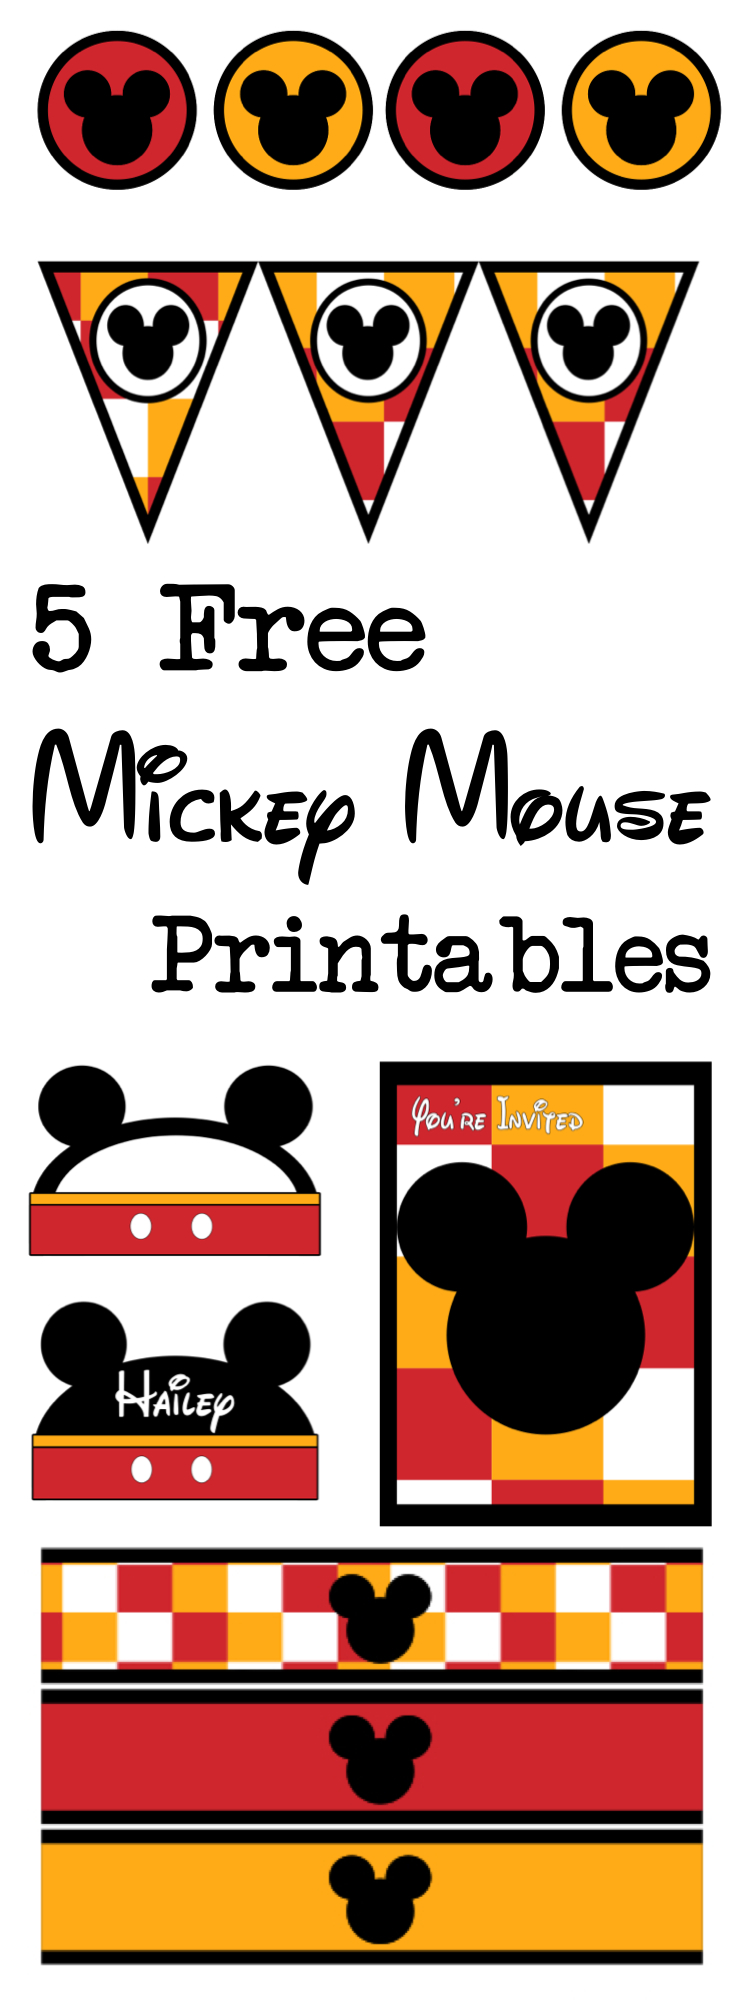 Five Mickey Mouse free printables for a Disney themed party. Print a free banner, watet bottle wrappers, cupcake toppers, invitations, name cards, and food labels. There are also tutorials on how to customize the items.